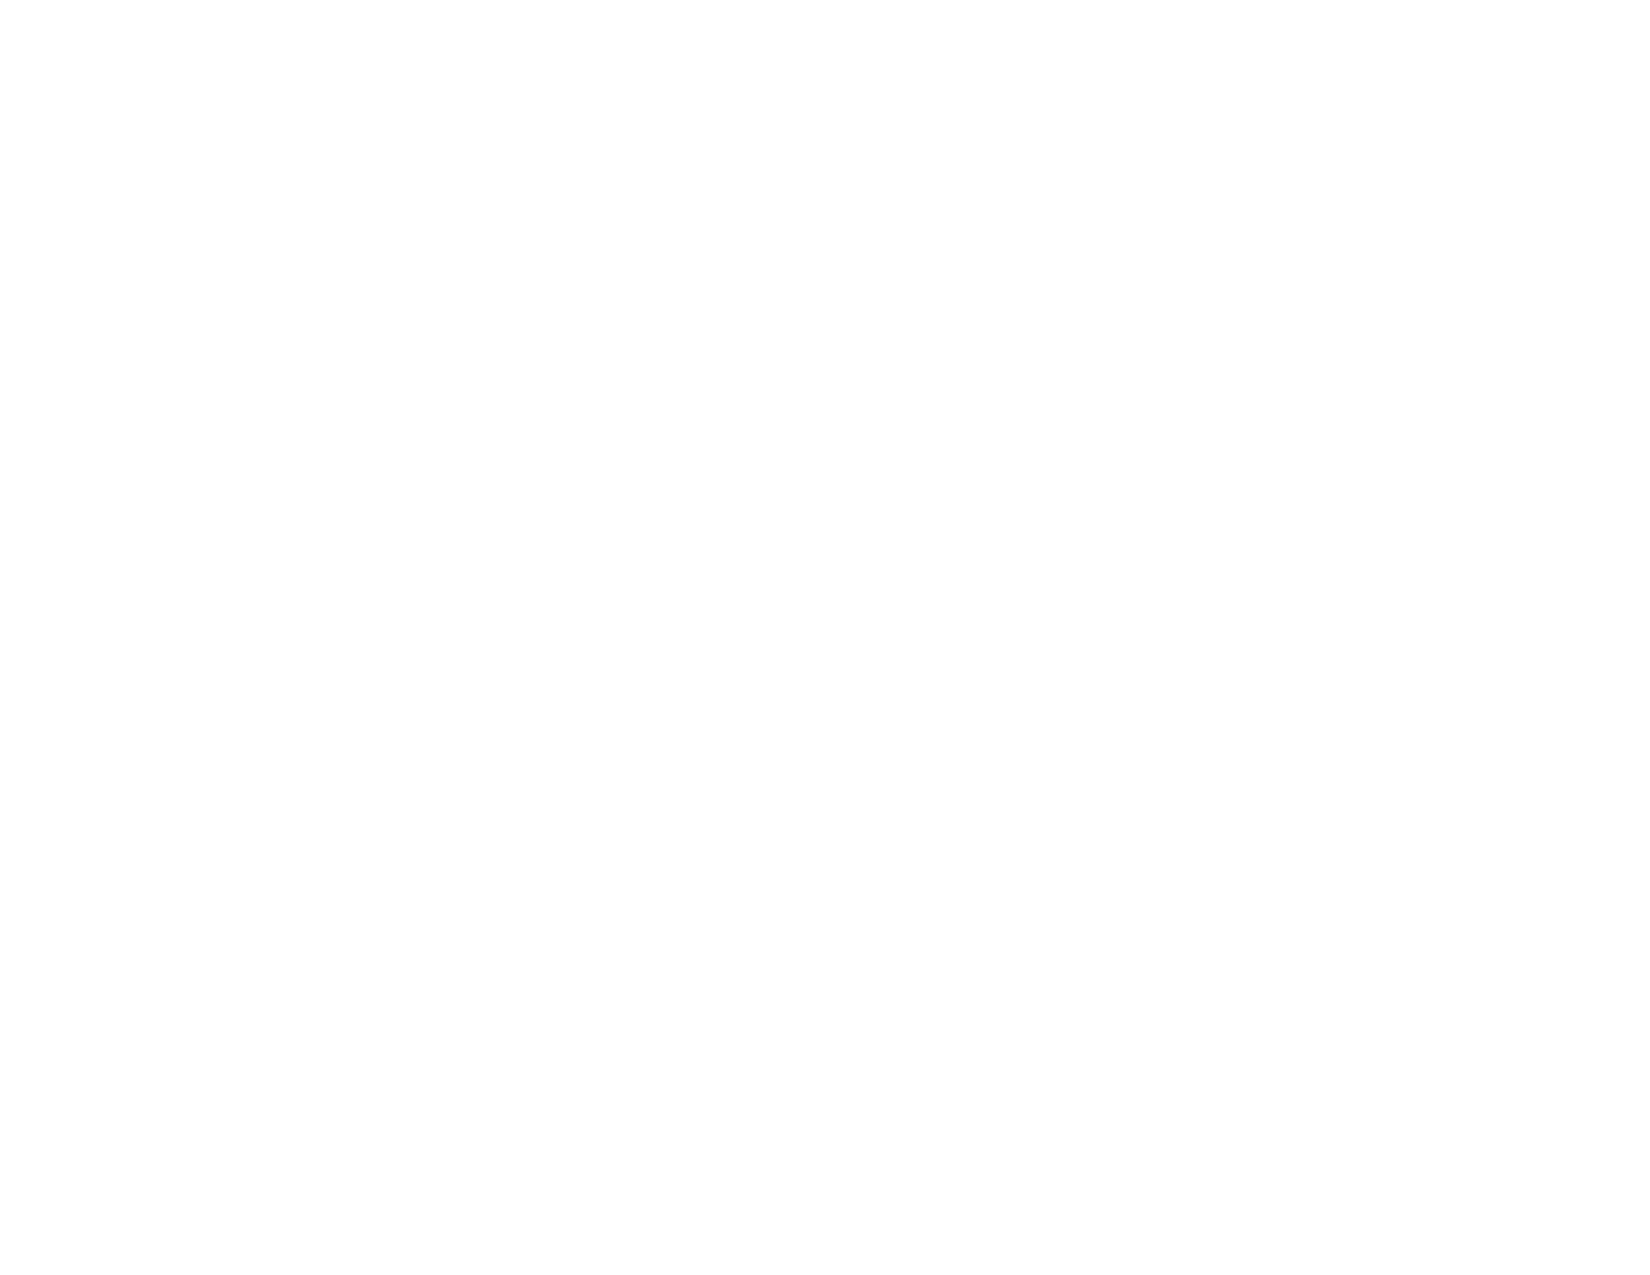 SFF22_Laurels_Audience Award- NEXT Presented by Adobe_WHITE.png